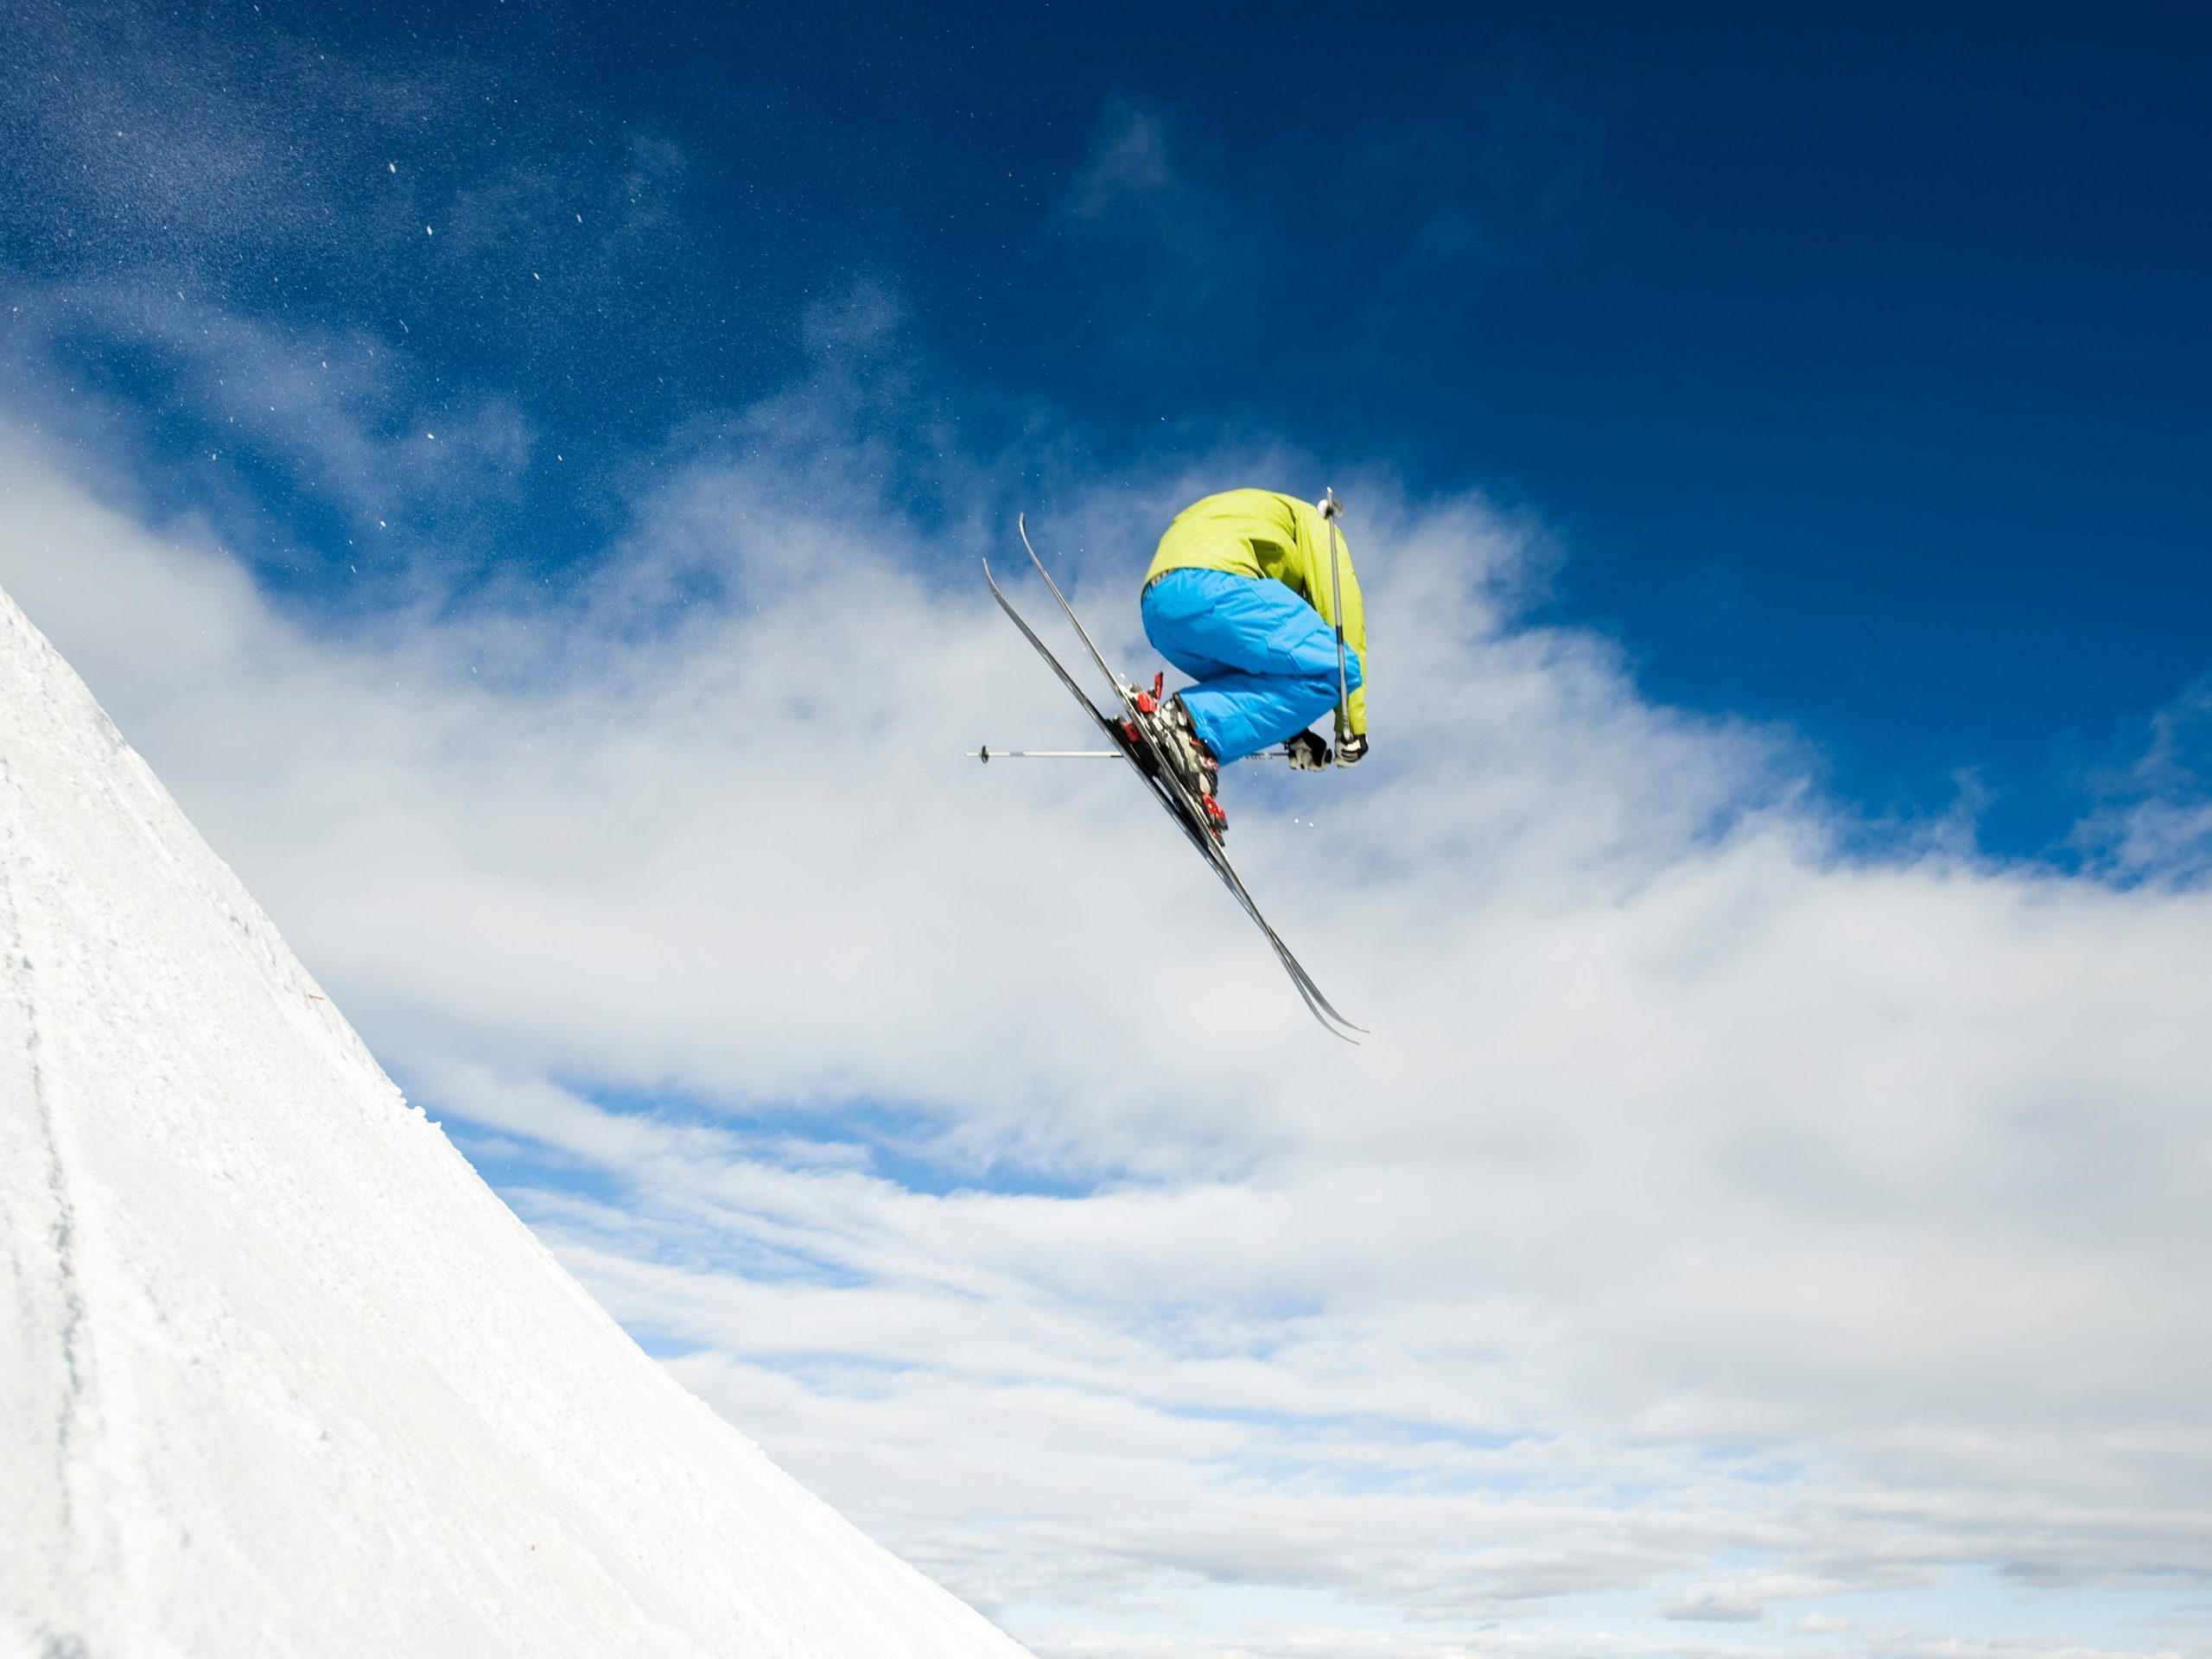 Male skier, wearing a light green jacket, bright blue snow pants, and red ski boots, in terrain park performing airborne maneuver. Snowmass Ski Area near Aspen, Colorado.